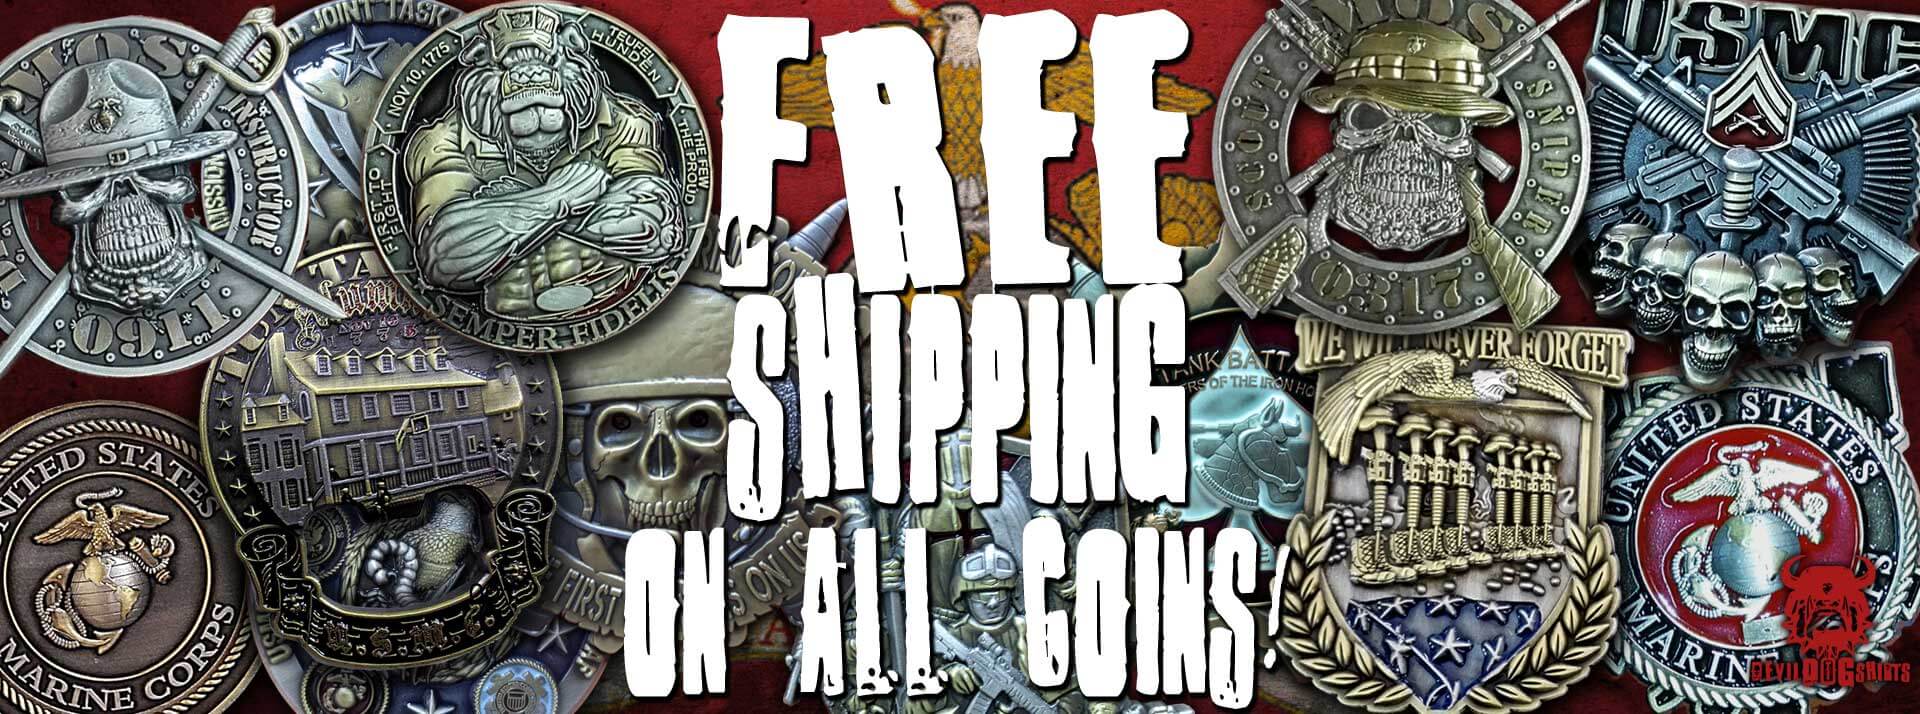 FREE SHIPPING on all Coin at devil Dog Shirts